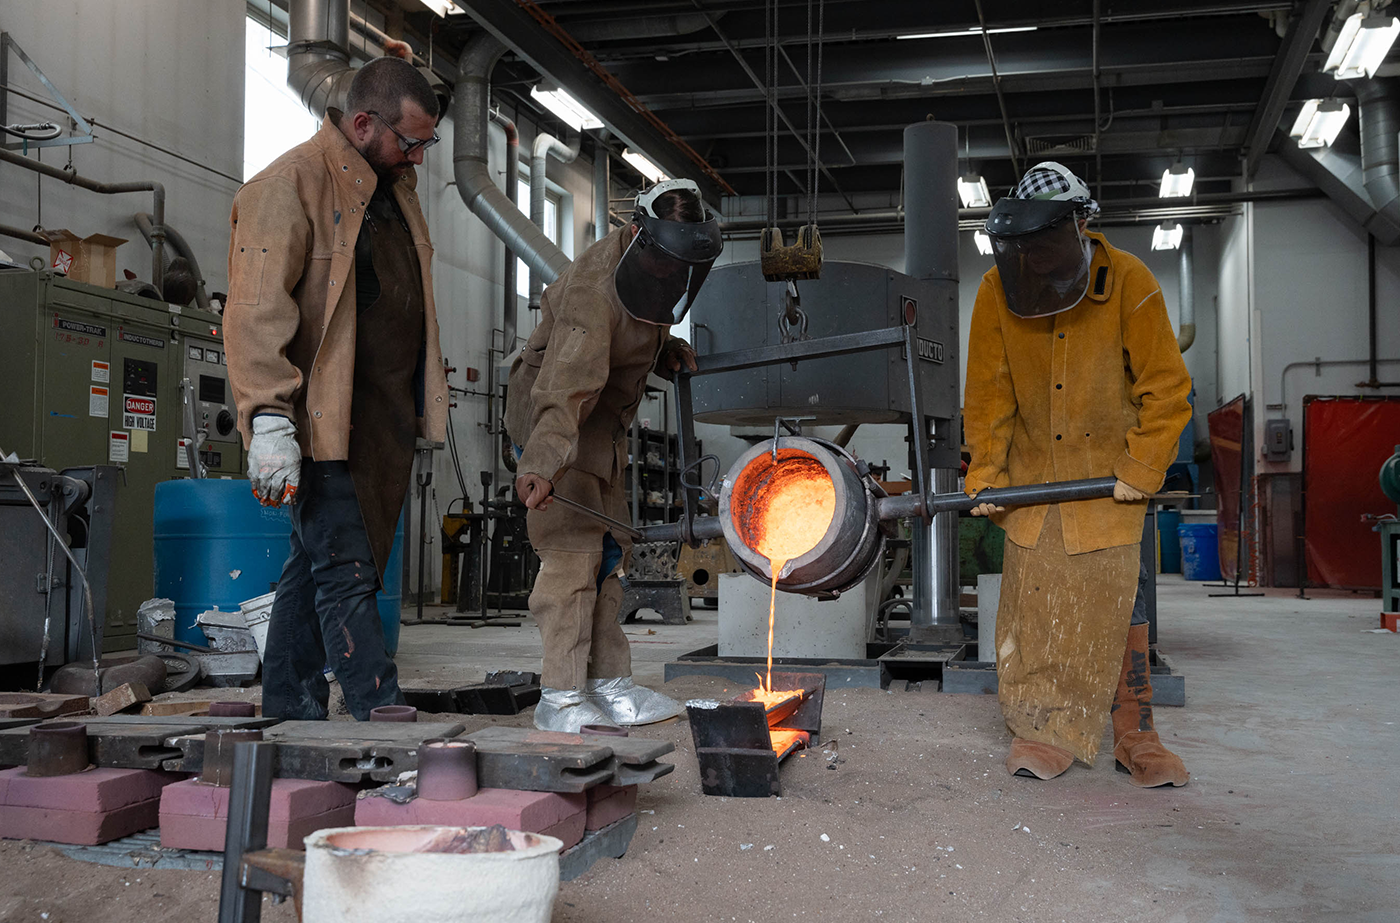 Once the sand molds are full, Tansey and Frank pour leftover bronze into ingots so that it can be reused in the next pour.